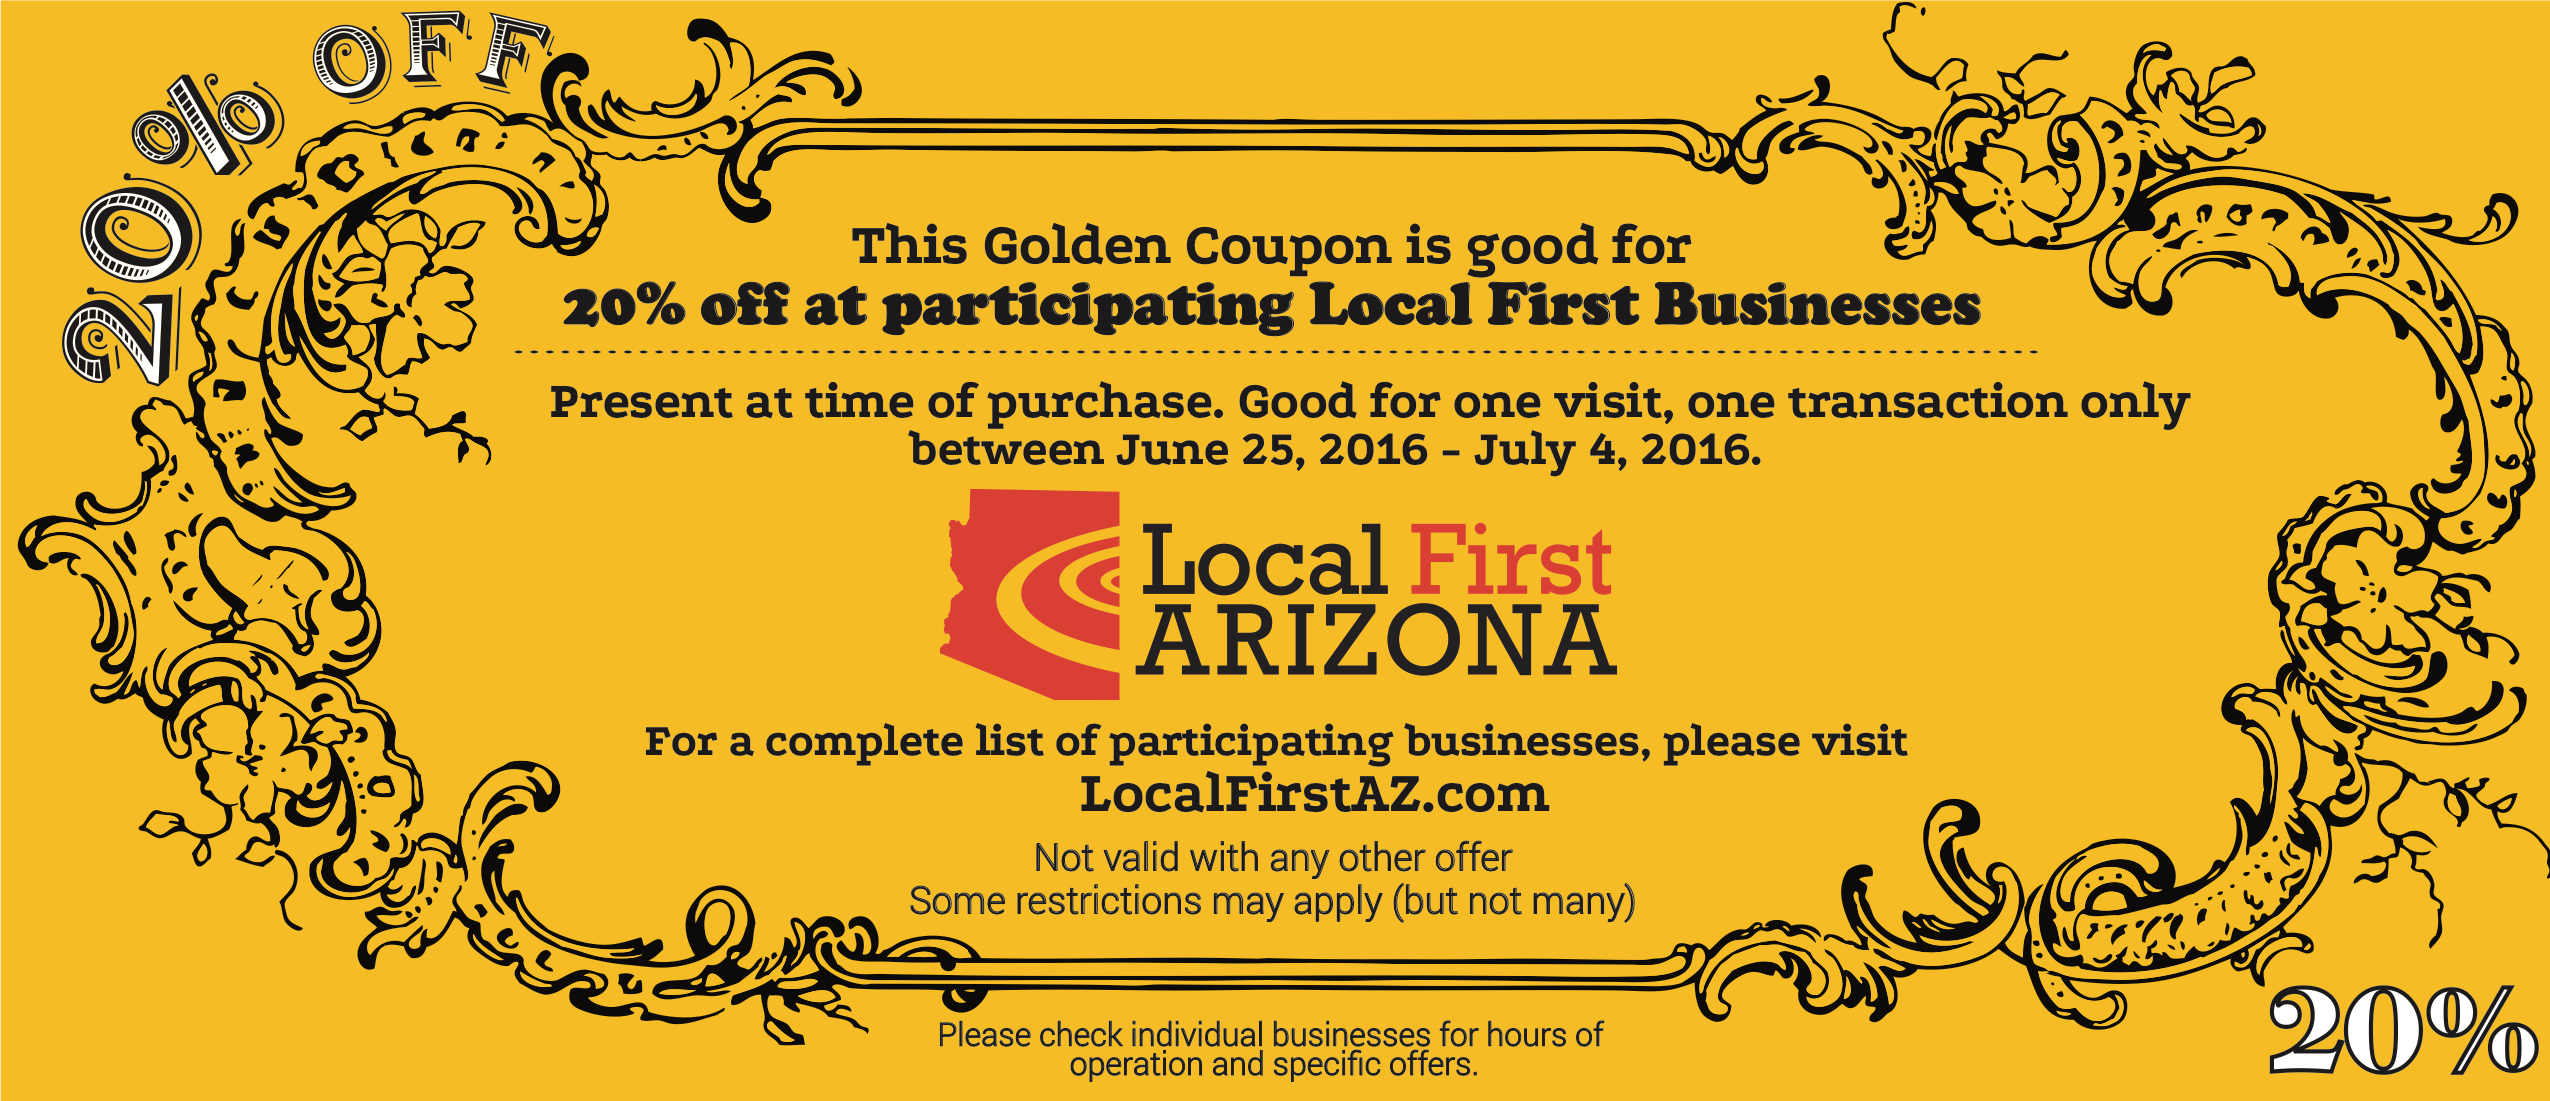 GoldenCoupon_2016-Front